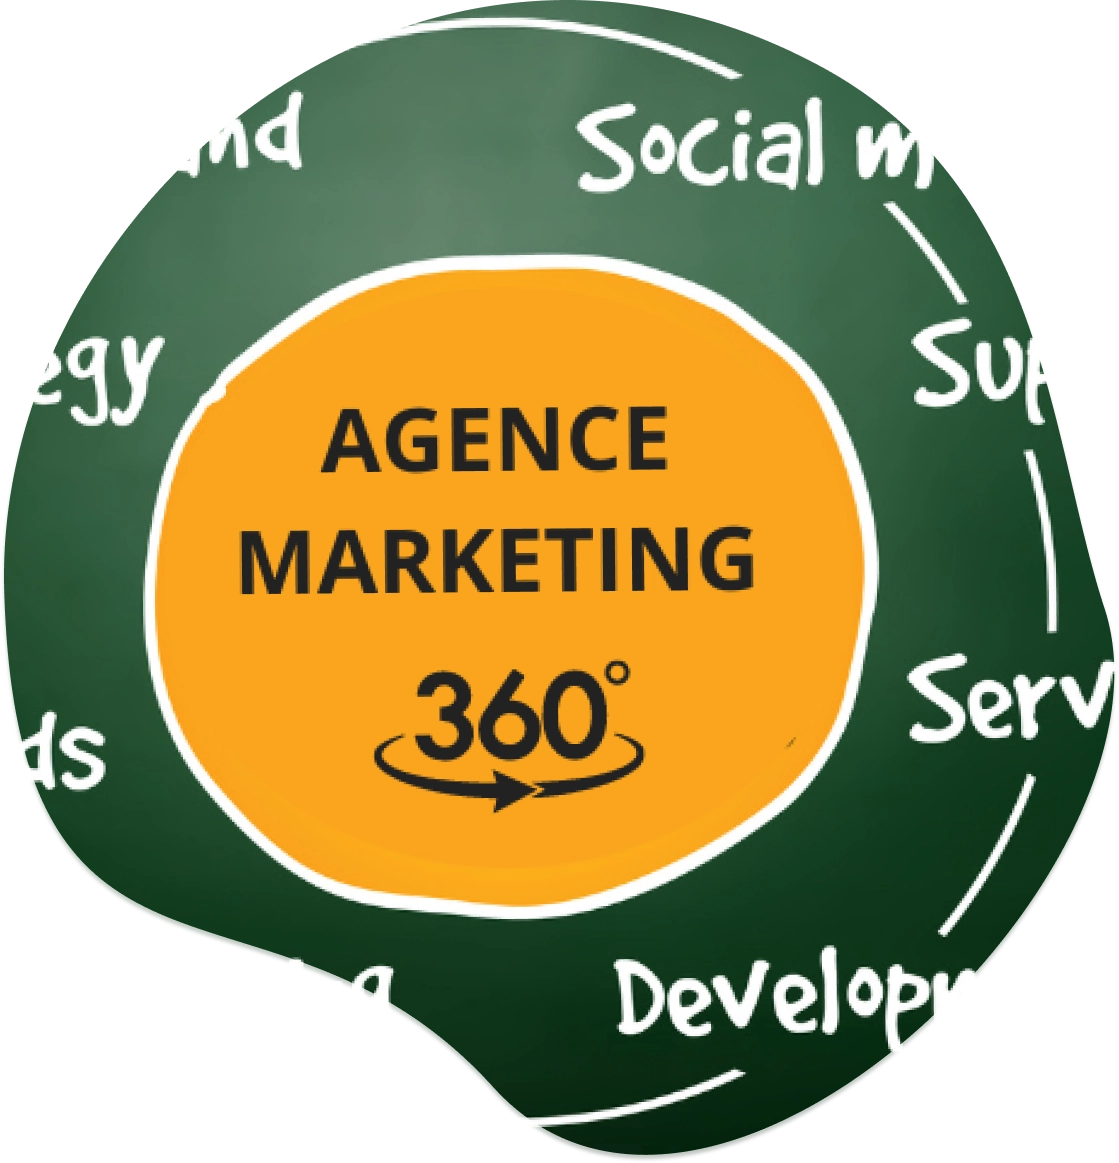 ROLE d'une Agence Marketing 360